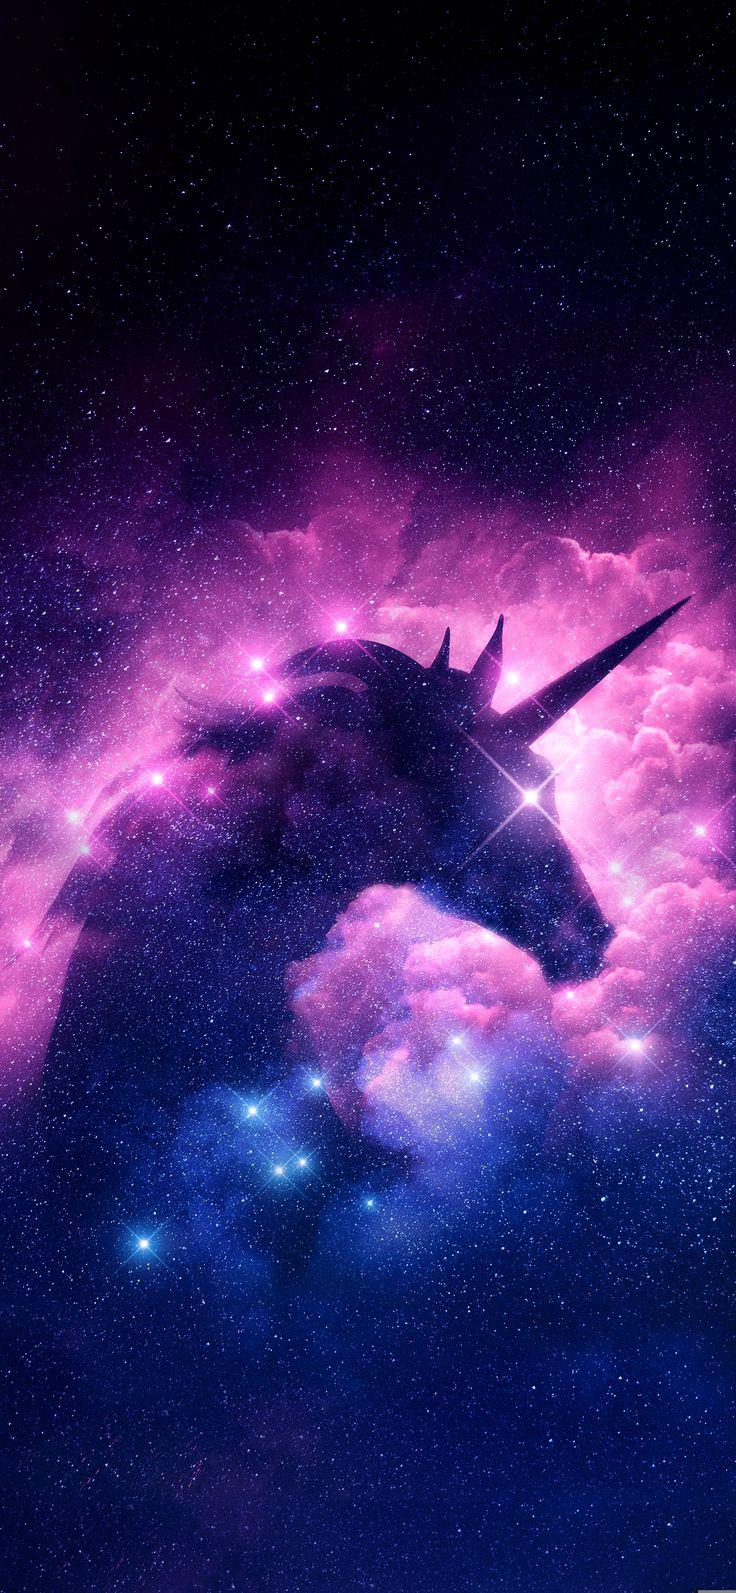 Unicorn For Phone Wallpapers